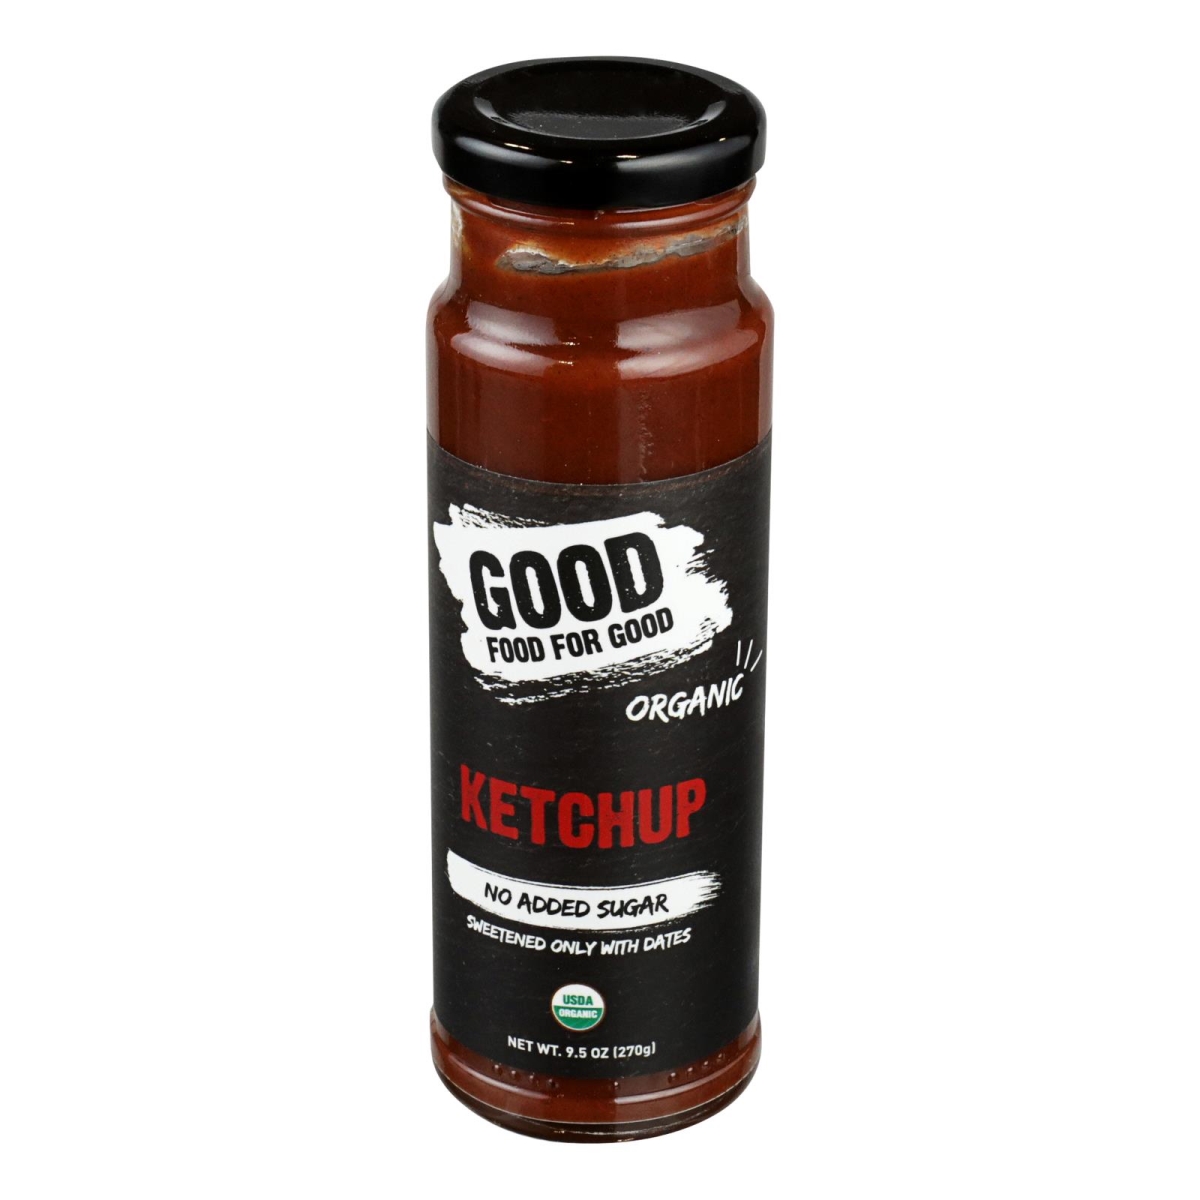 Picture of Good Food for Good 2512481 9.5 oz Organic Ketchup